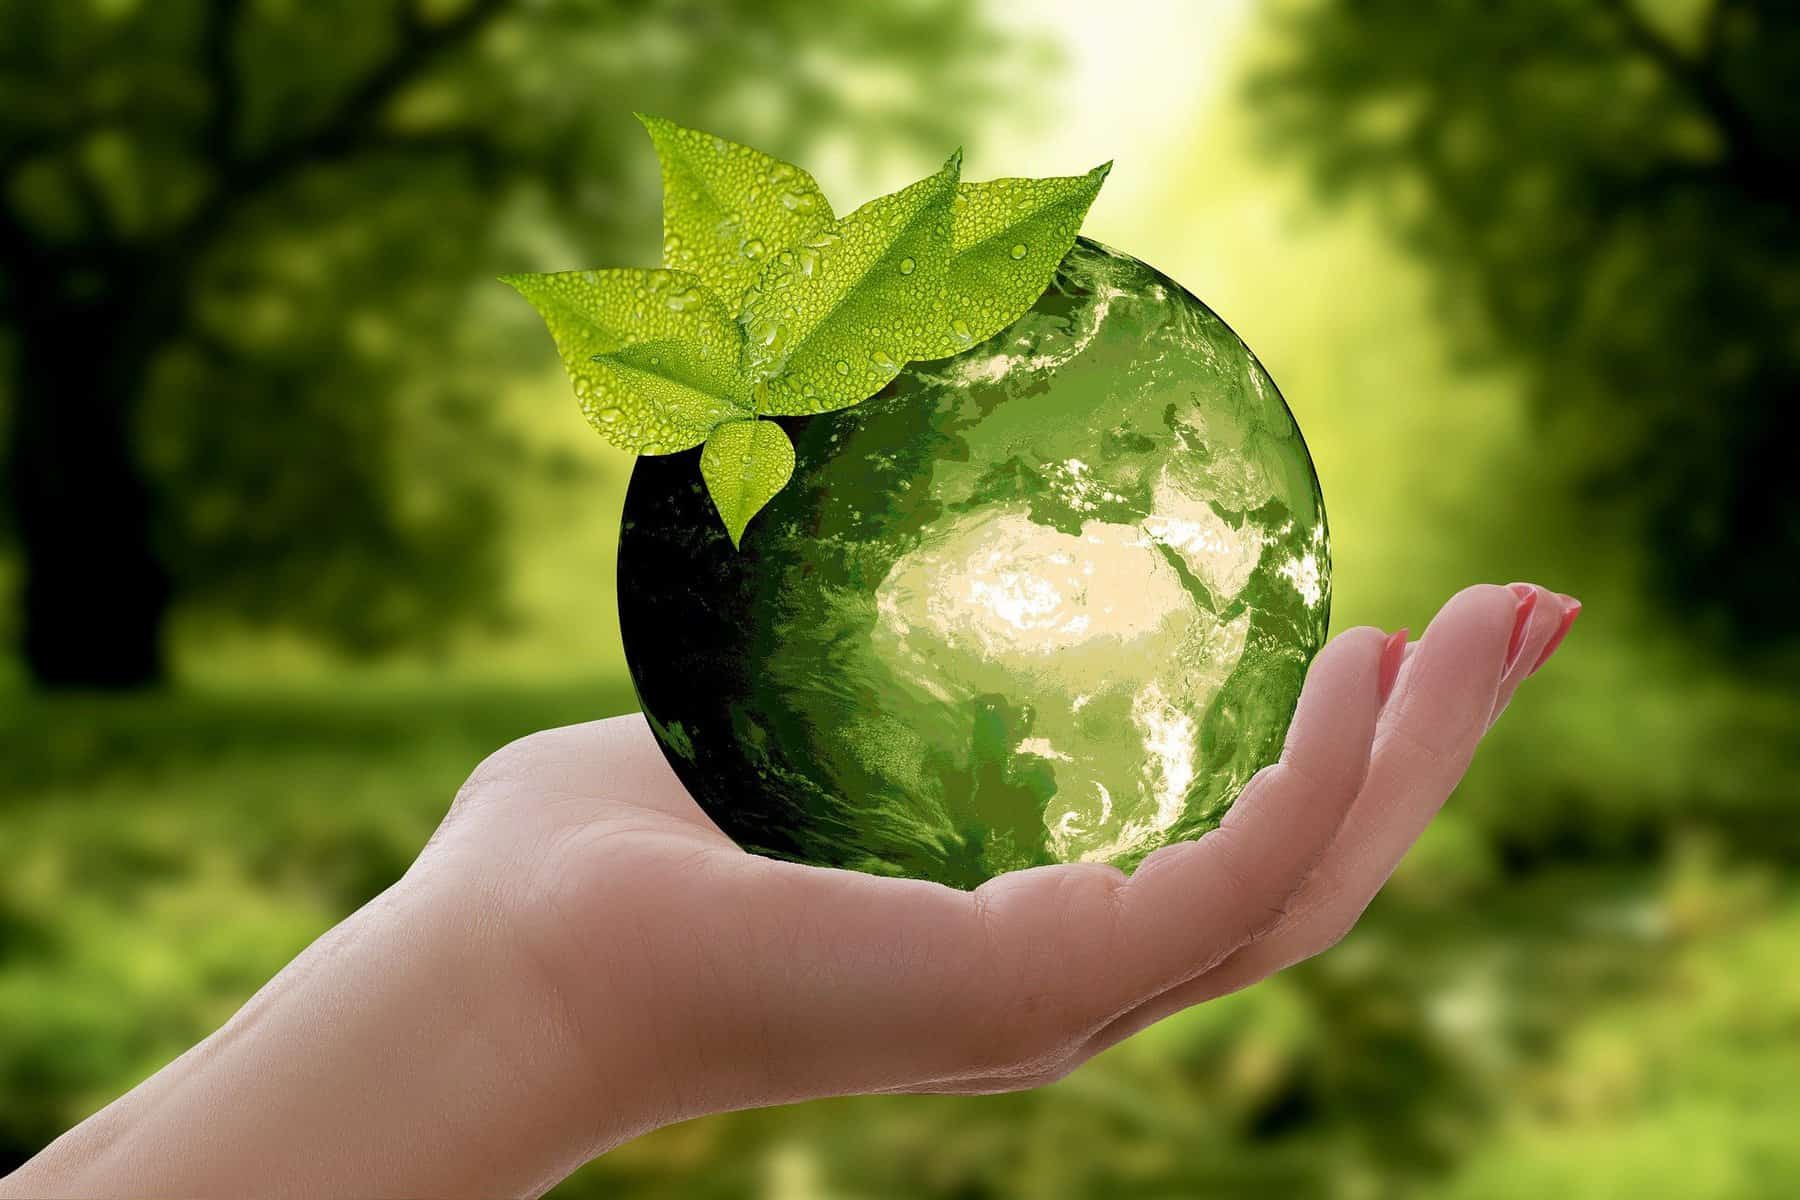 a woman's hand holds a green glass globe against a green vegetation background with a sprig of dew-covered leaves coming out of it.